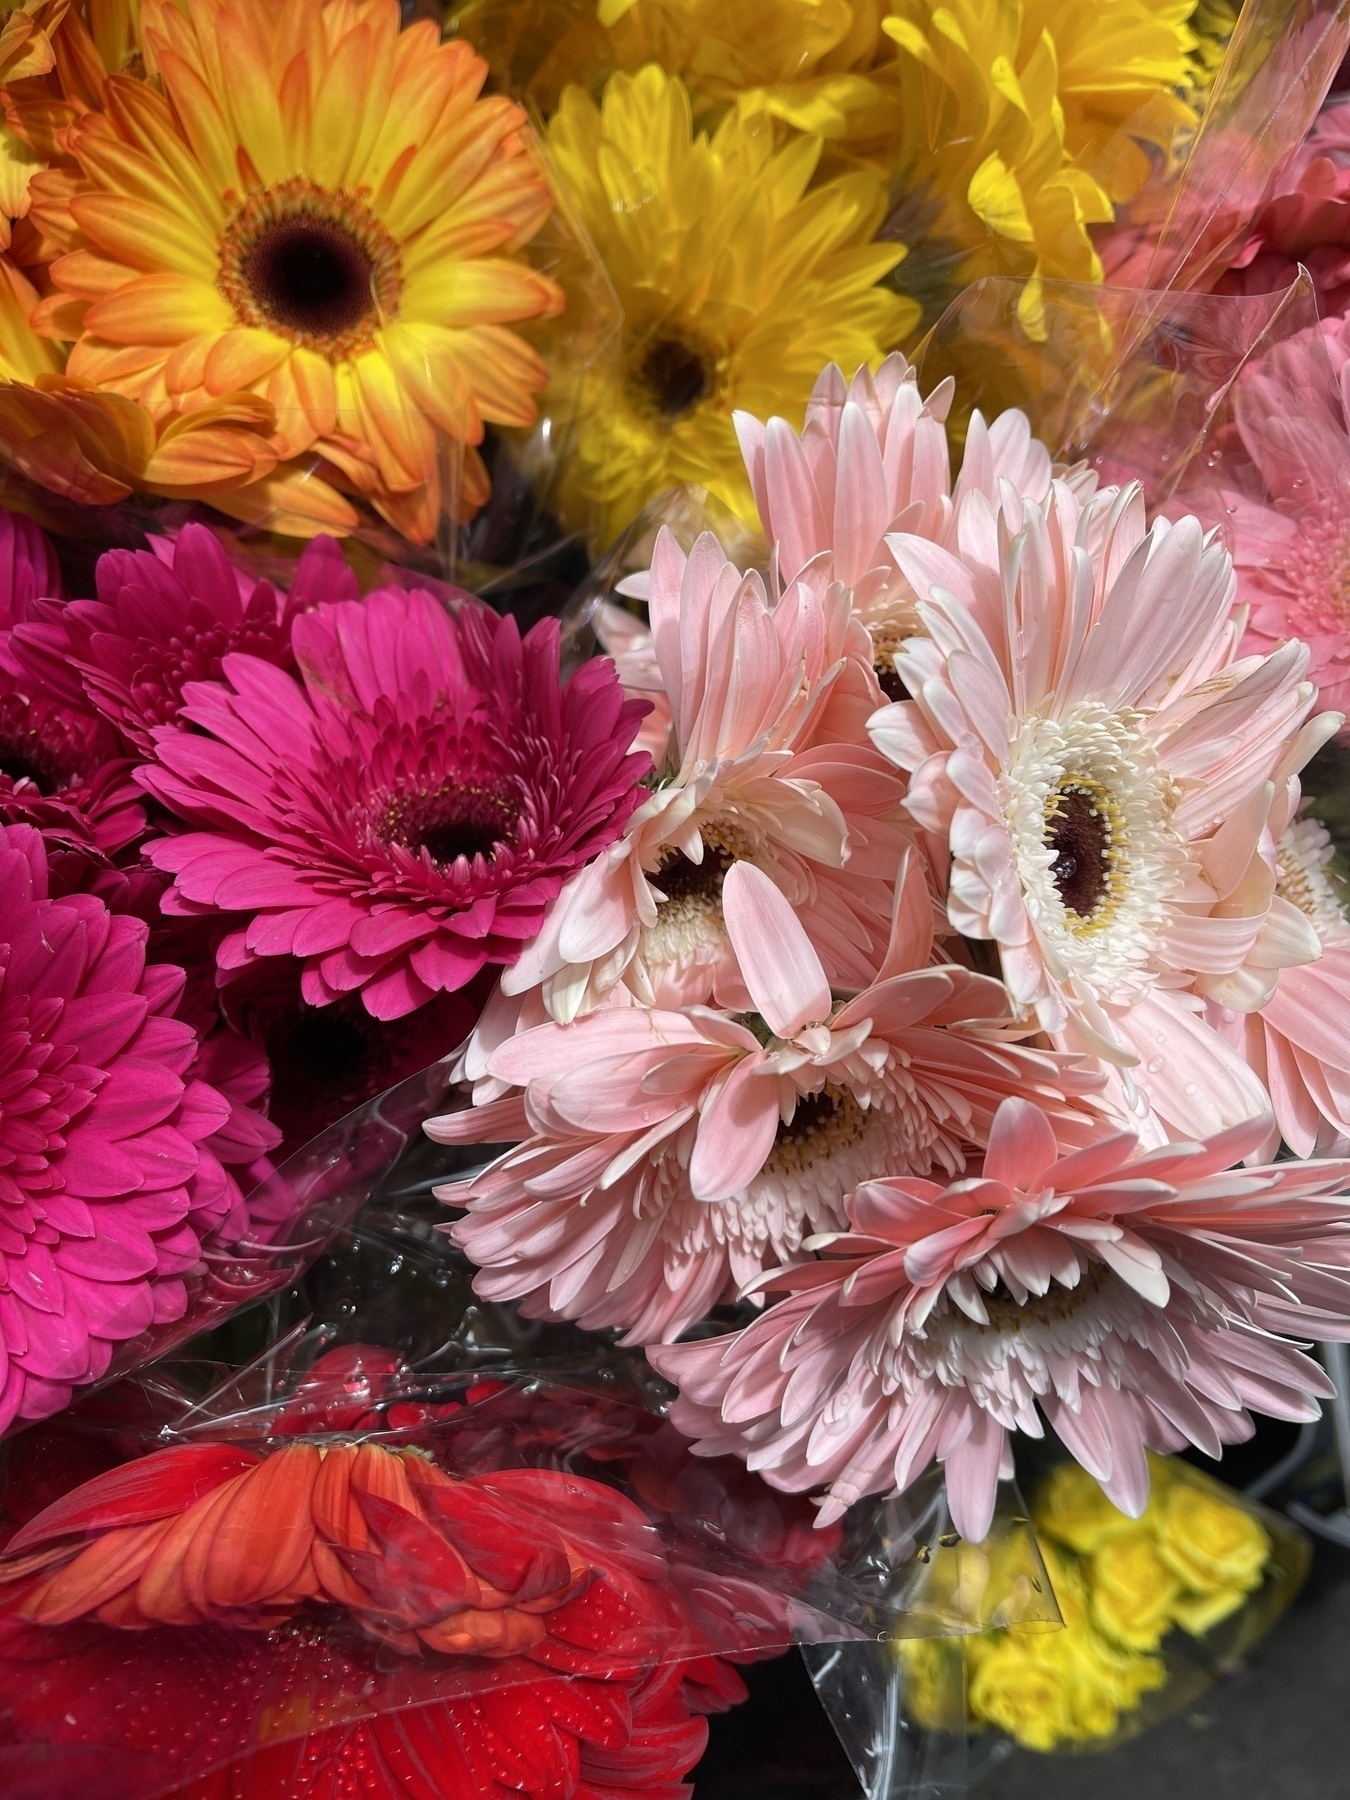 A selection of colour flowers.